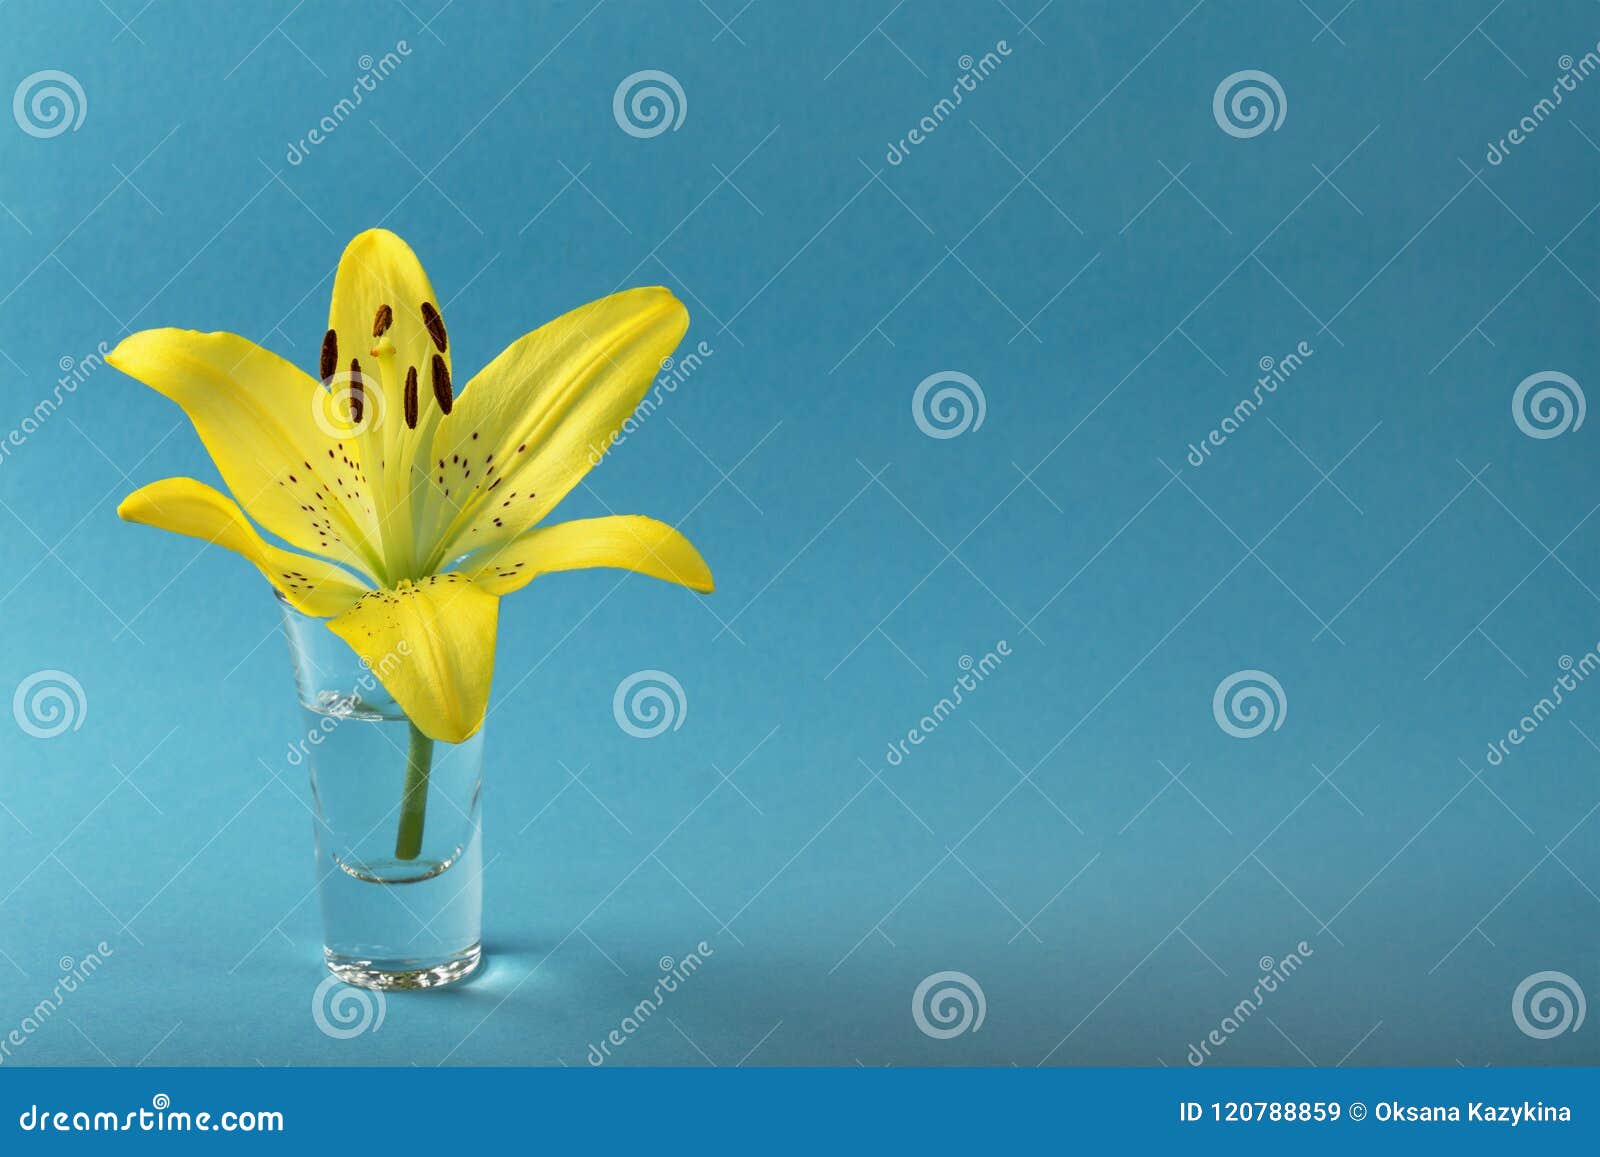 Lily Flower in Water on Blue Background for Designers Stock Image ...